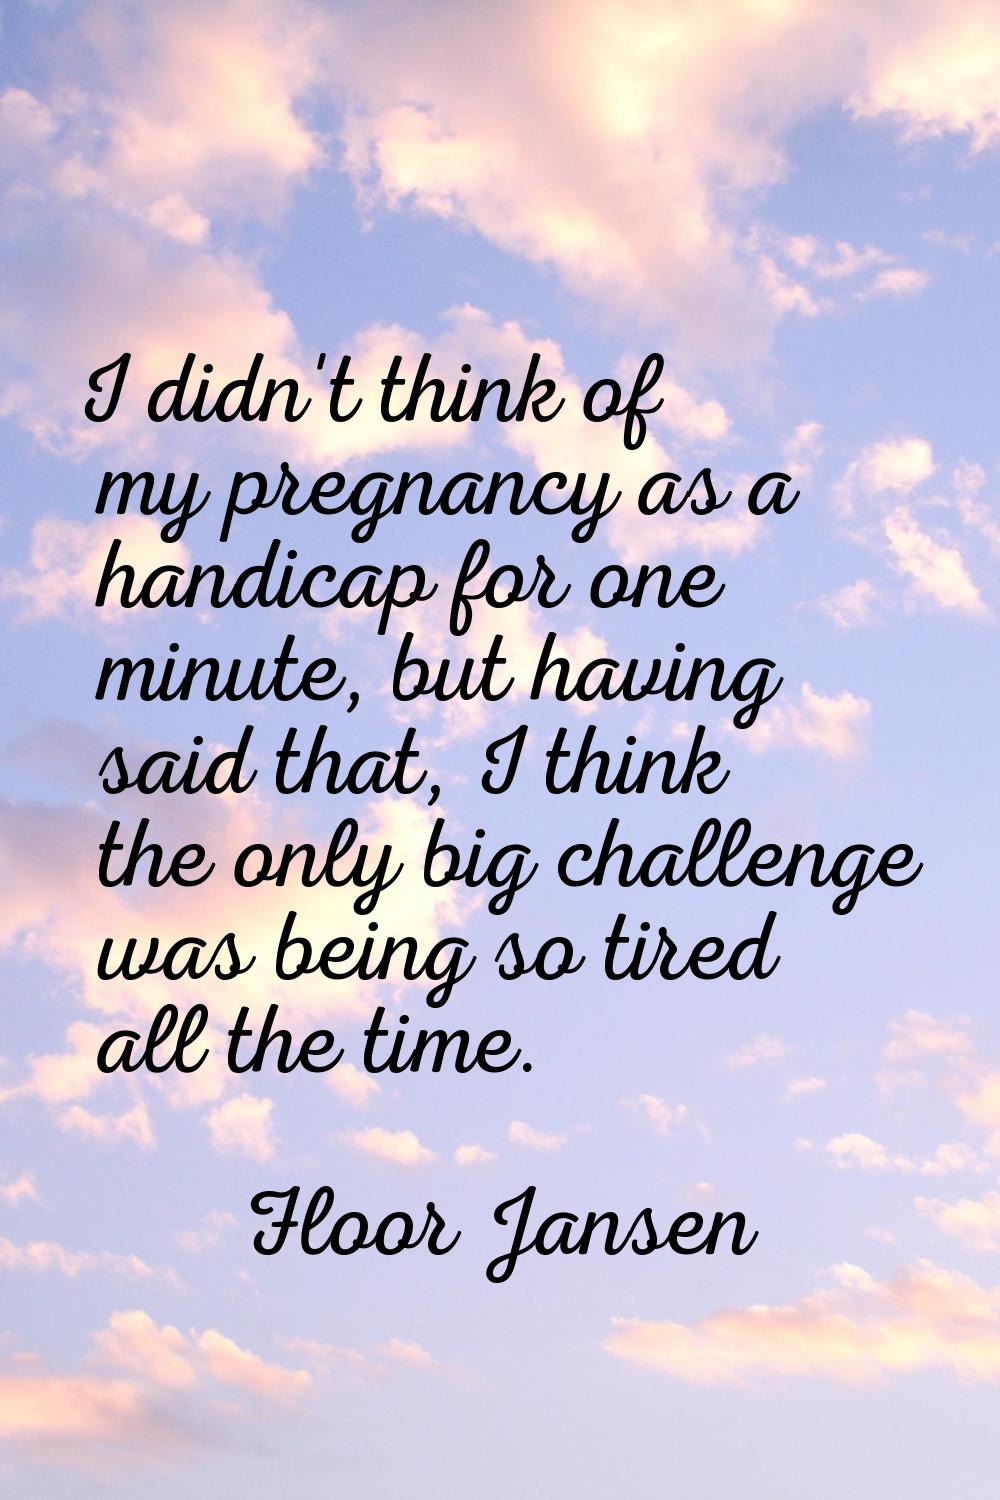 I didn't think of my pregnancy as a handicap for one minute, but having said that, I think the only